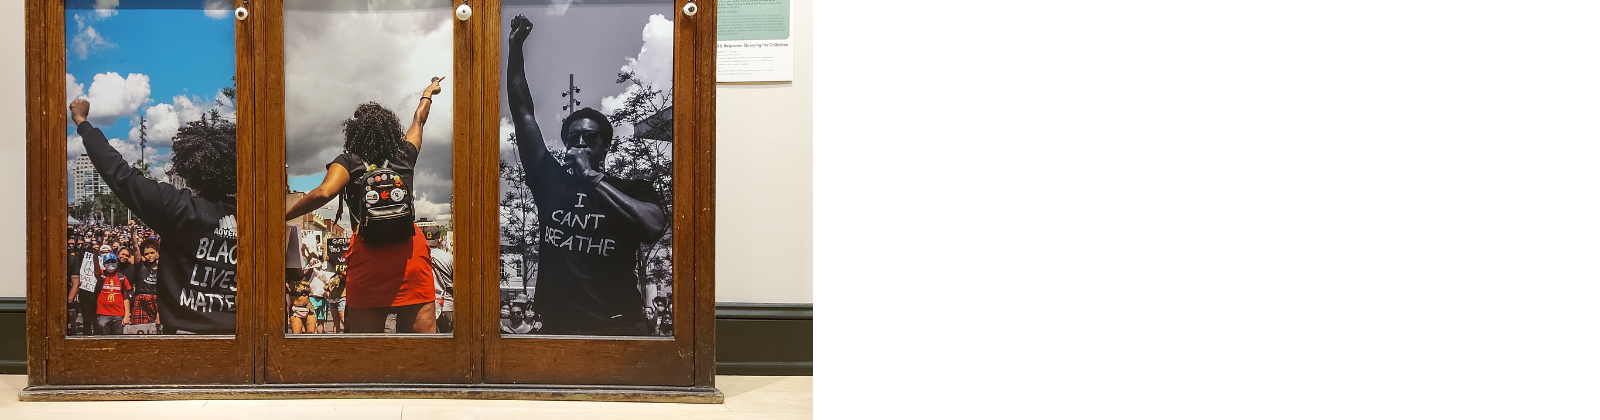 Three-photo panel on display in a cabinet at Guelph Museums. The photos feature three distinct moments from the Black Lives Matter protest in June, 2020. Speakers are standing with their backs to the camera and raising their hands to a crowd of people.